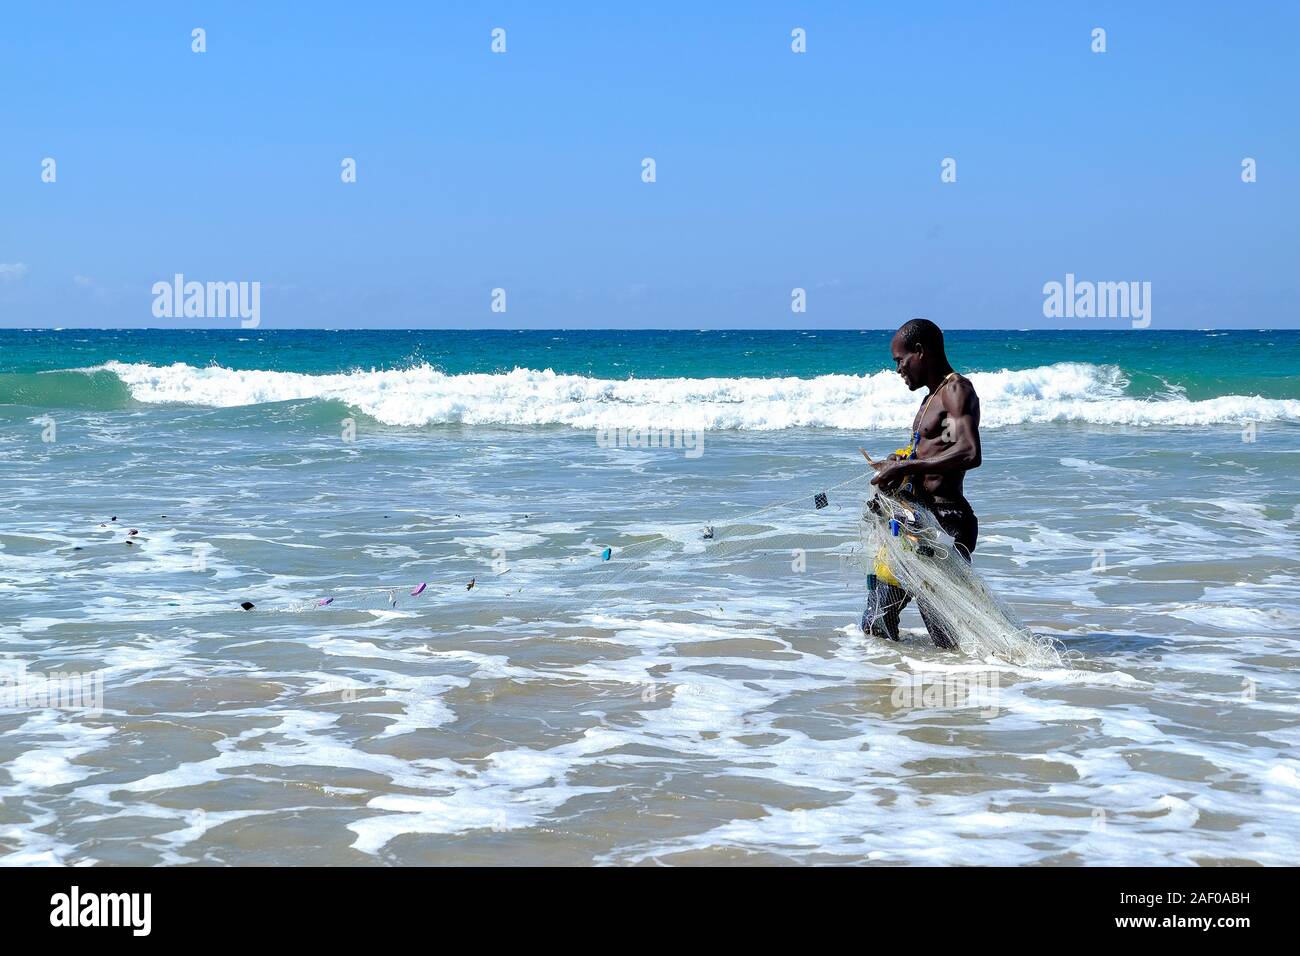 African fisherman in shallow water with his fishing net Stock Photo